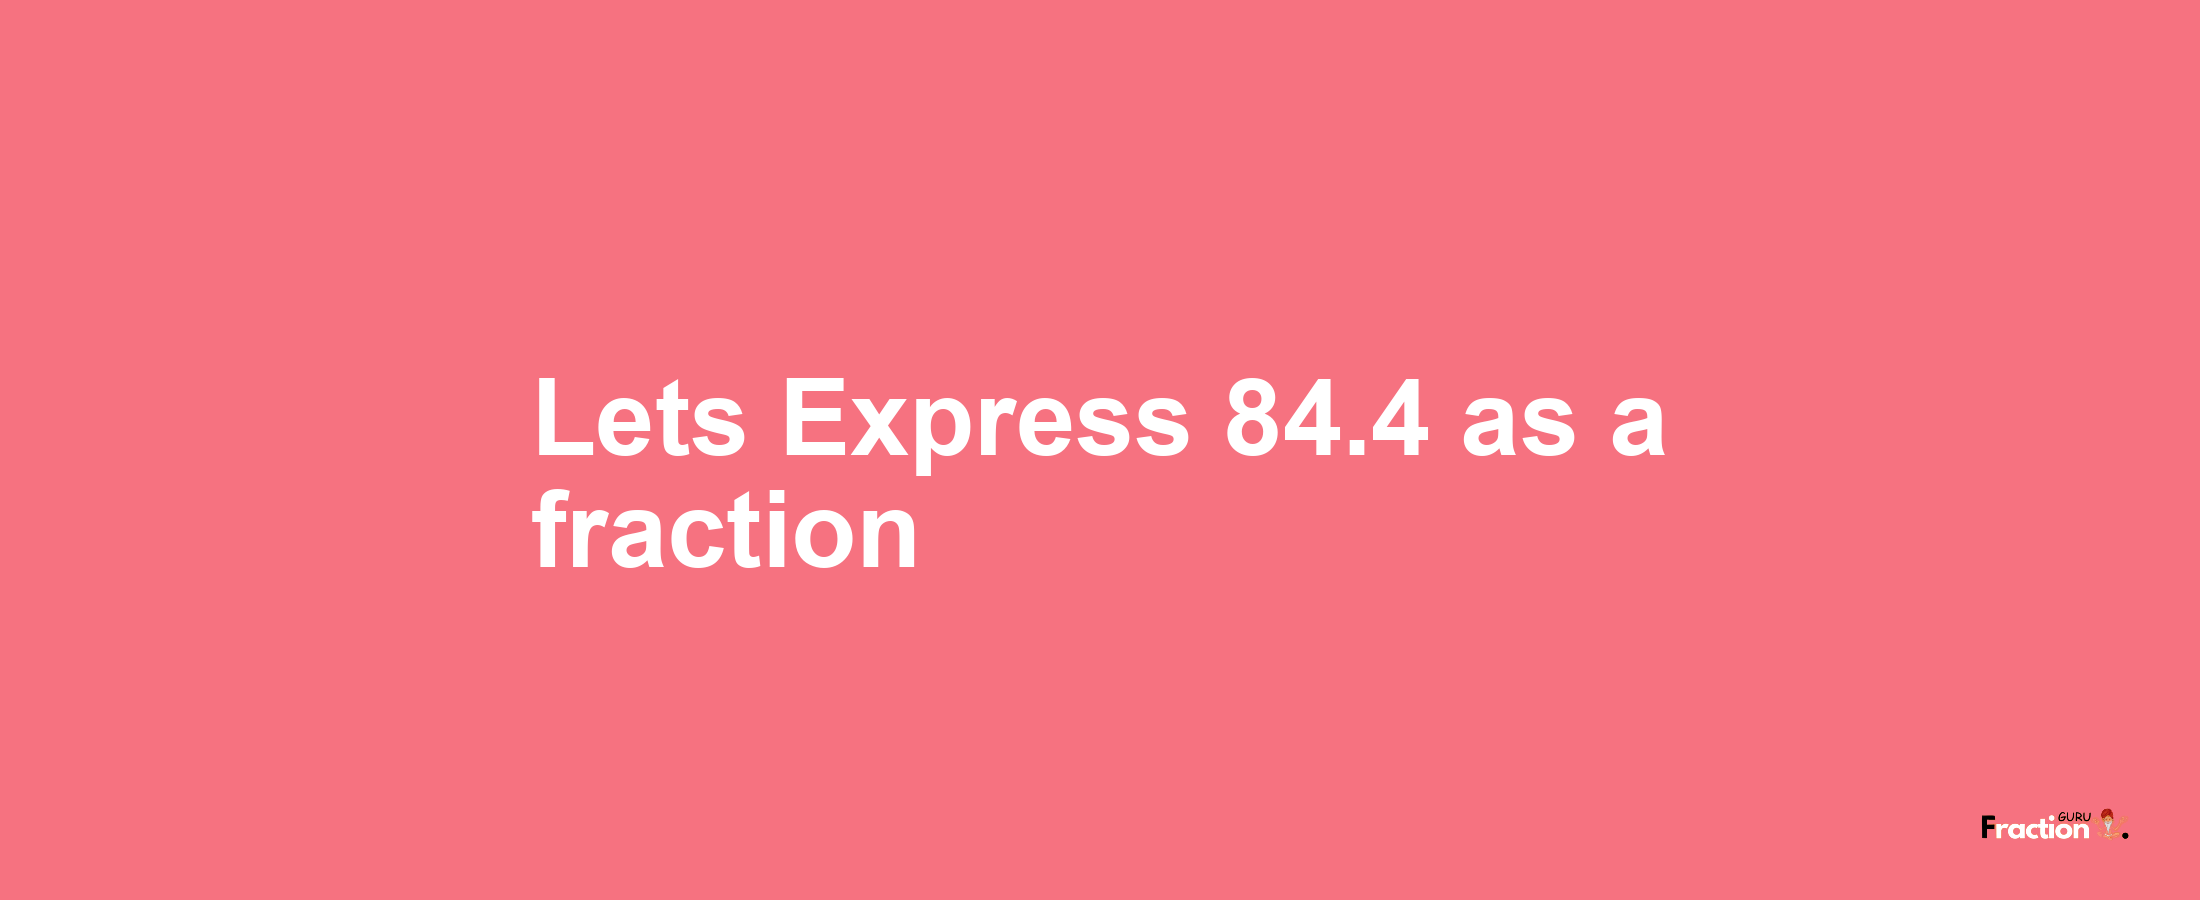 Lets Express 84.4 as afraction